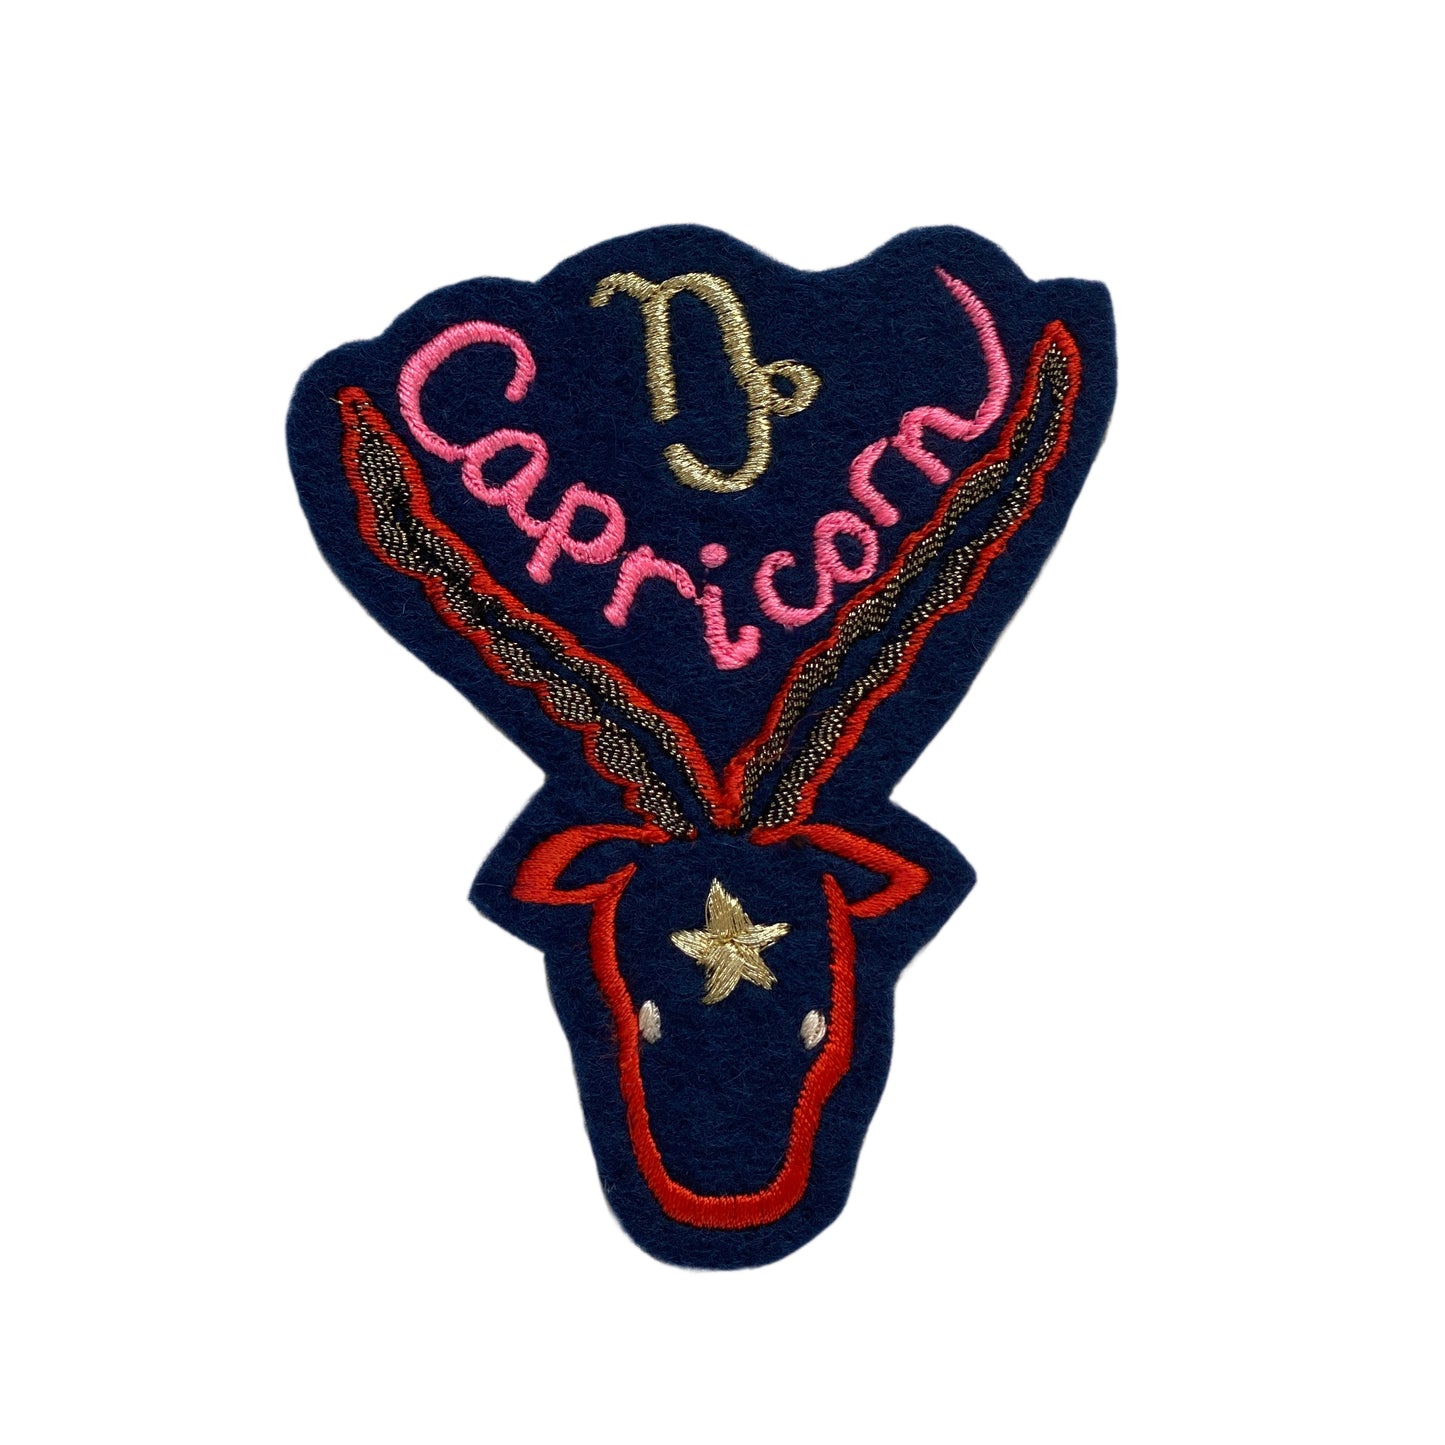 Capricorn embroidered patch on white background